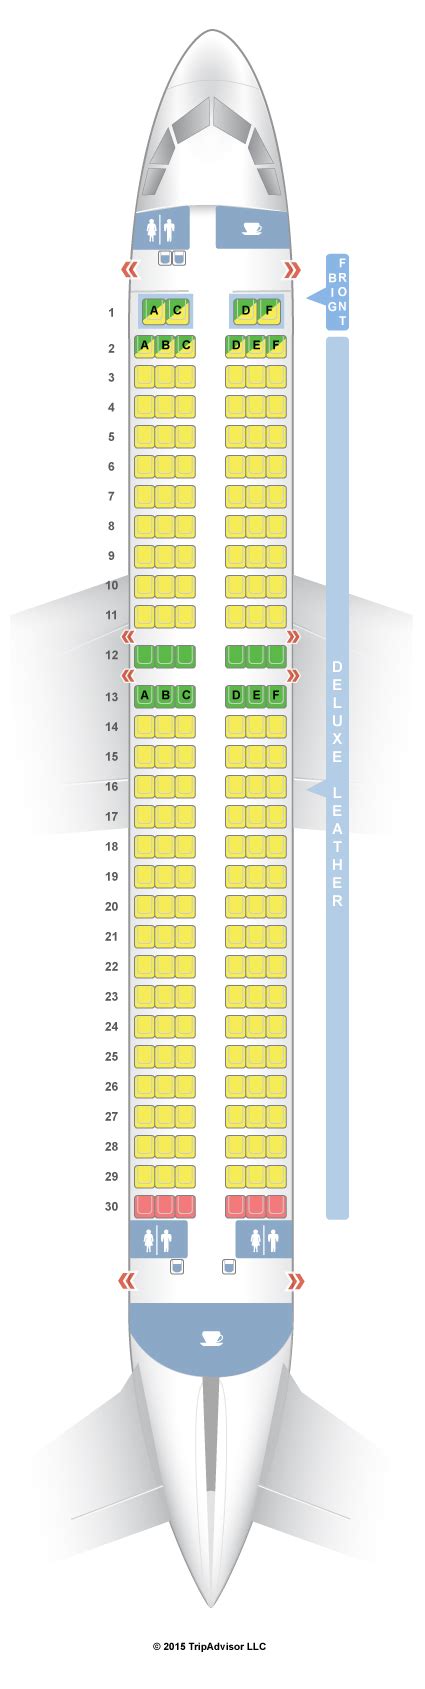 Planes & Seat Maps > Airbus A320 